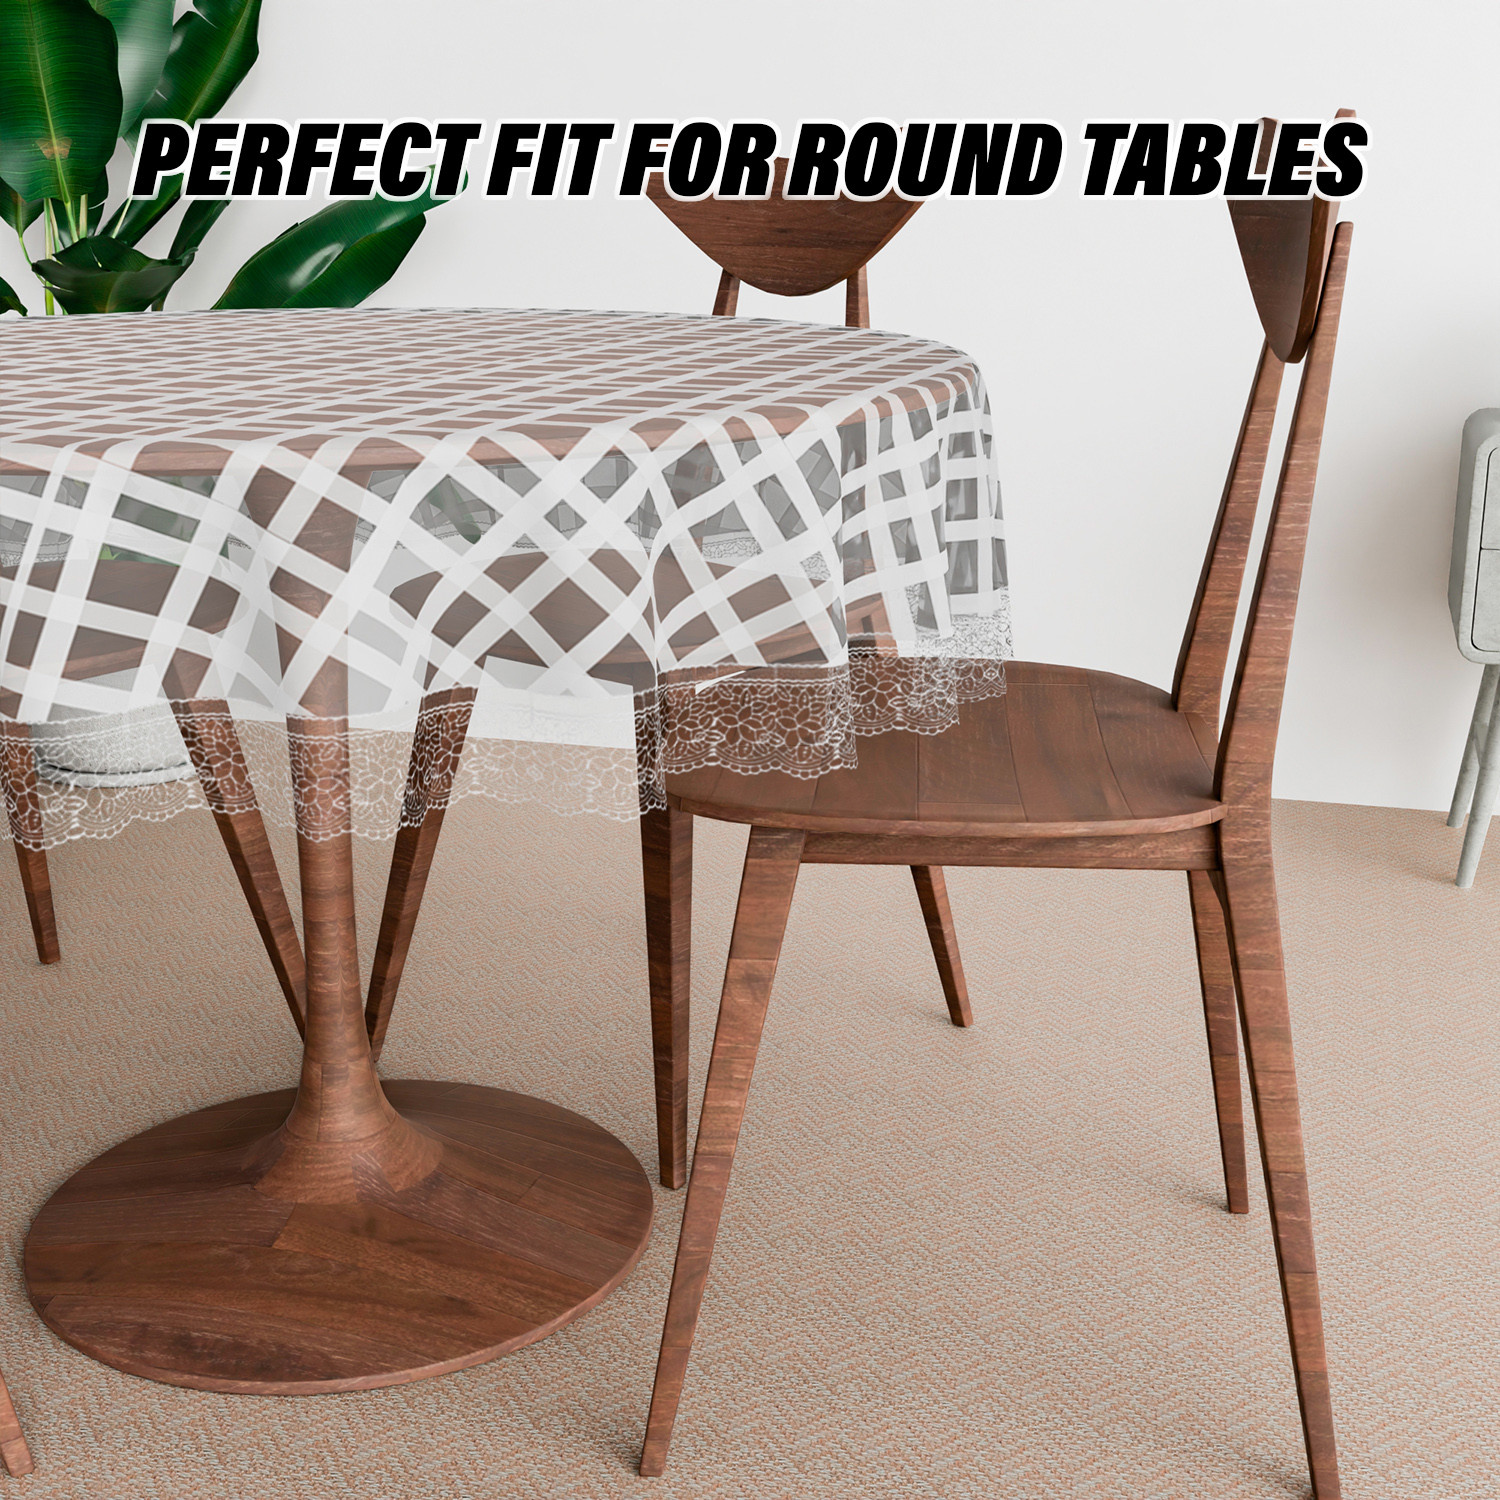 Kuber Industries Round Table Cover | PVC Table Cloth for Round Tables | 4 Seater Round Table Cloth | Self Check Kitchen Dining Tablecloth | Tabletop Cover | 60 Inch | White